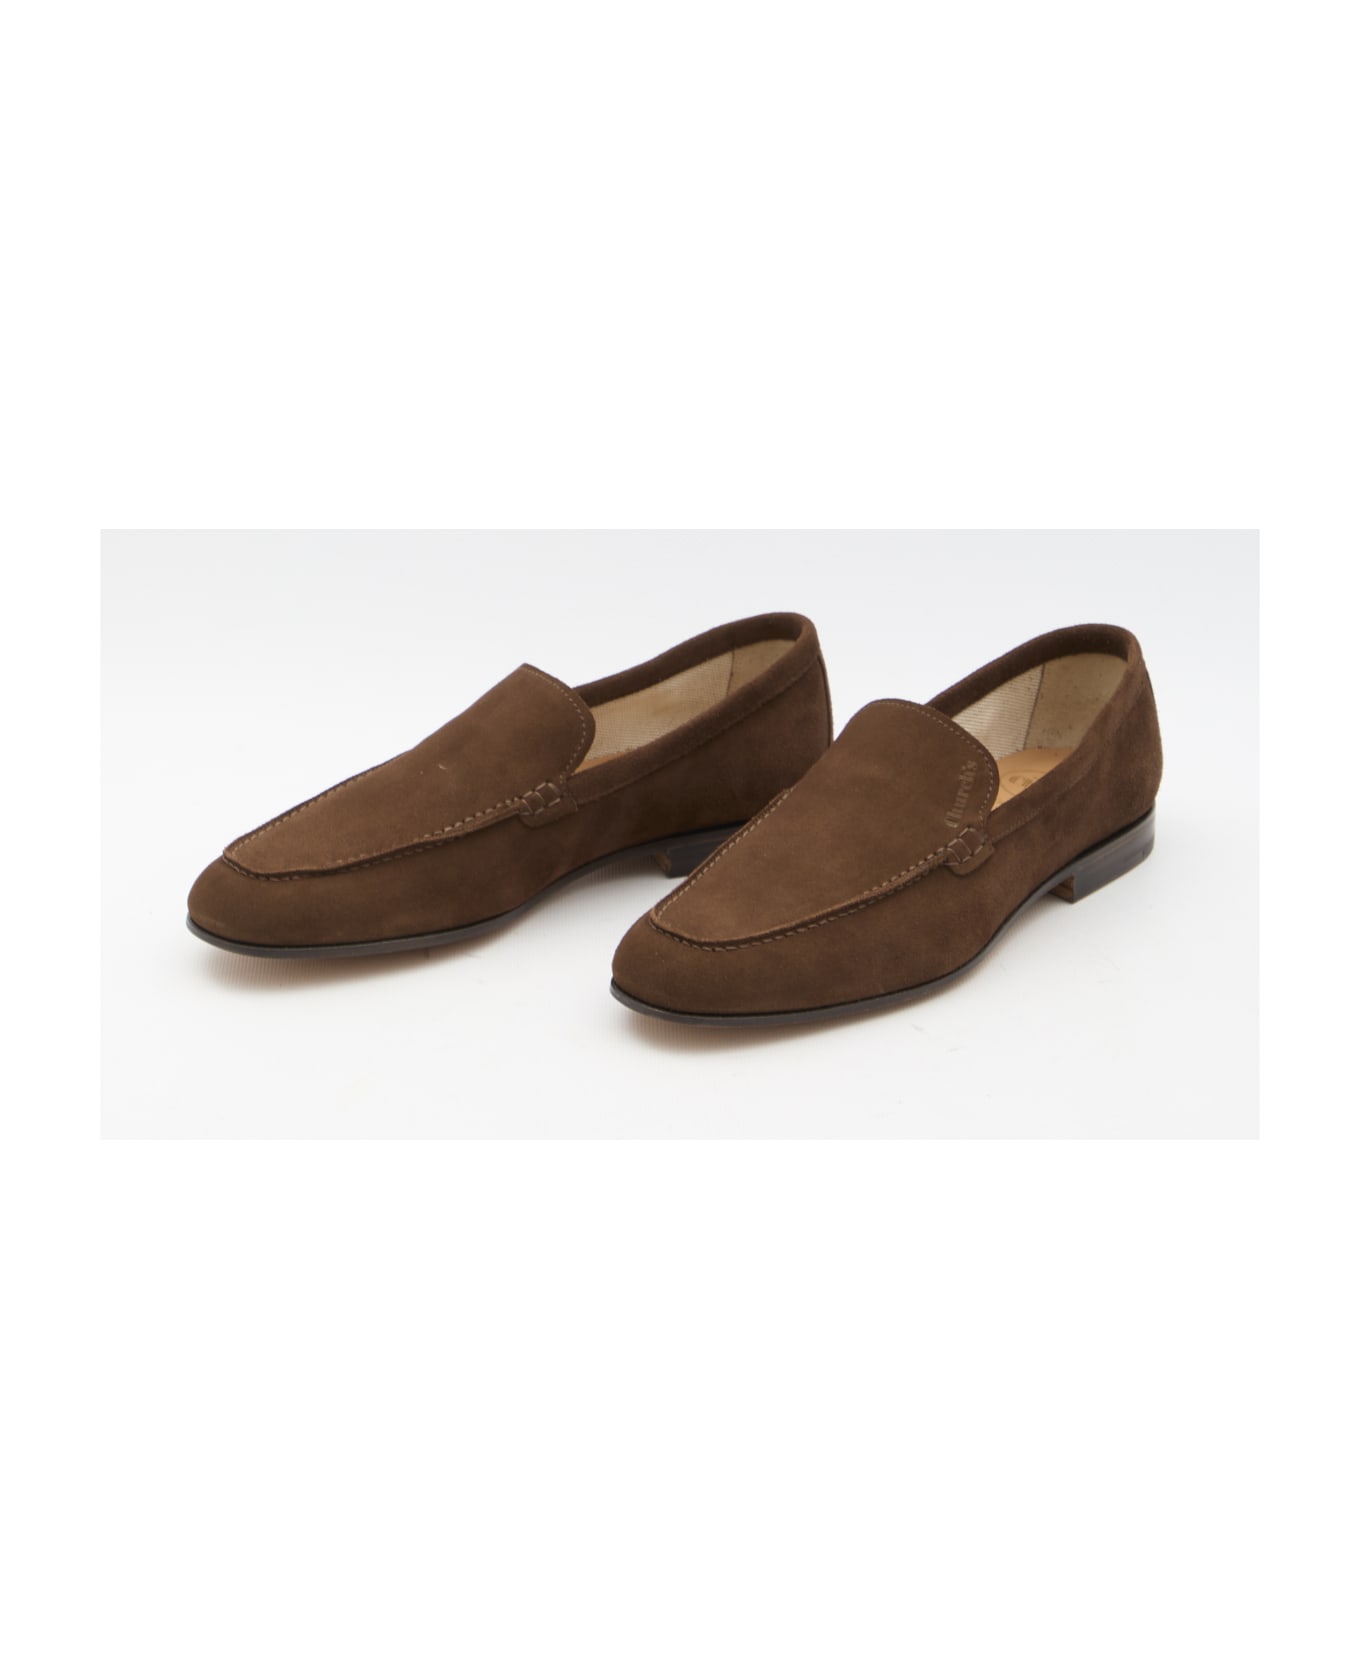 Church's Margate Loafers - BROWN ローファー＆デッキシューズ